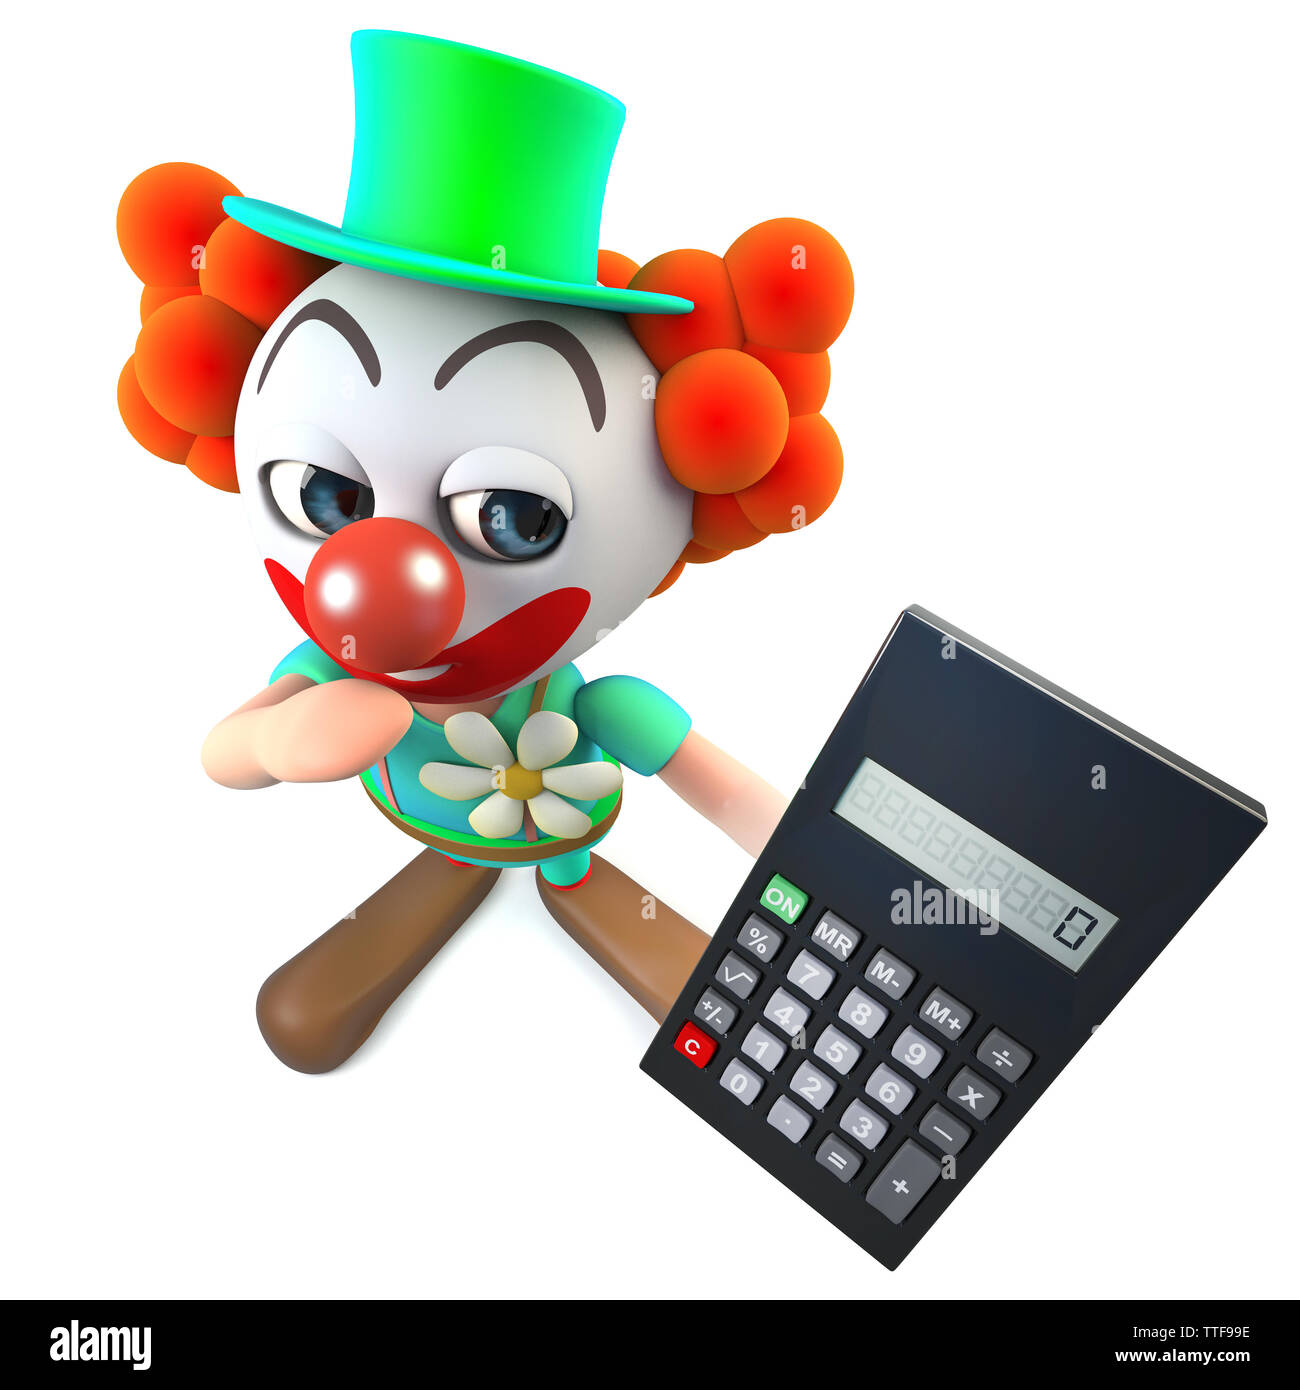 3d render of a funny cartoon clown character holding a digital calculator Stock Photo